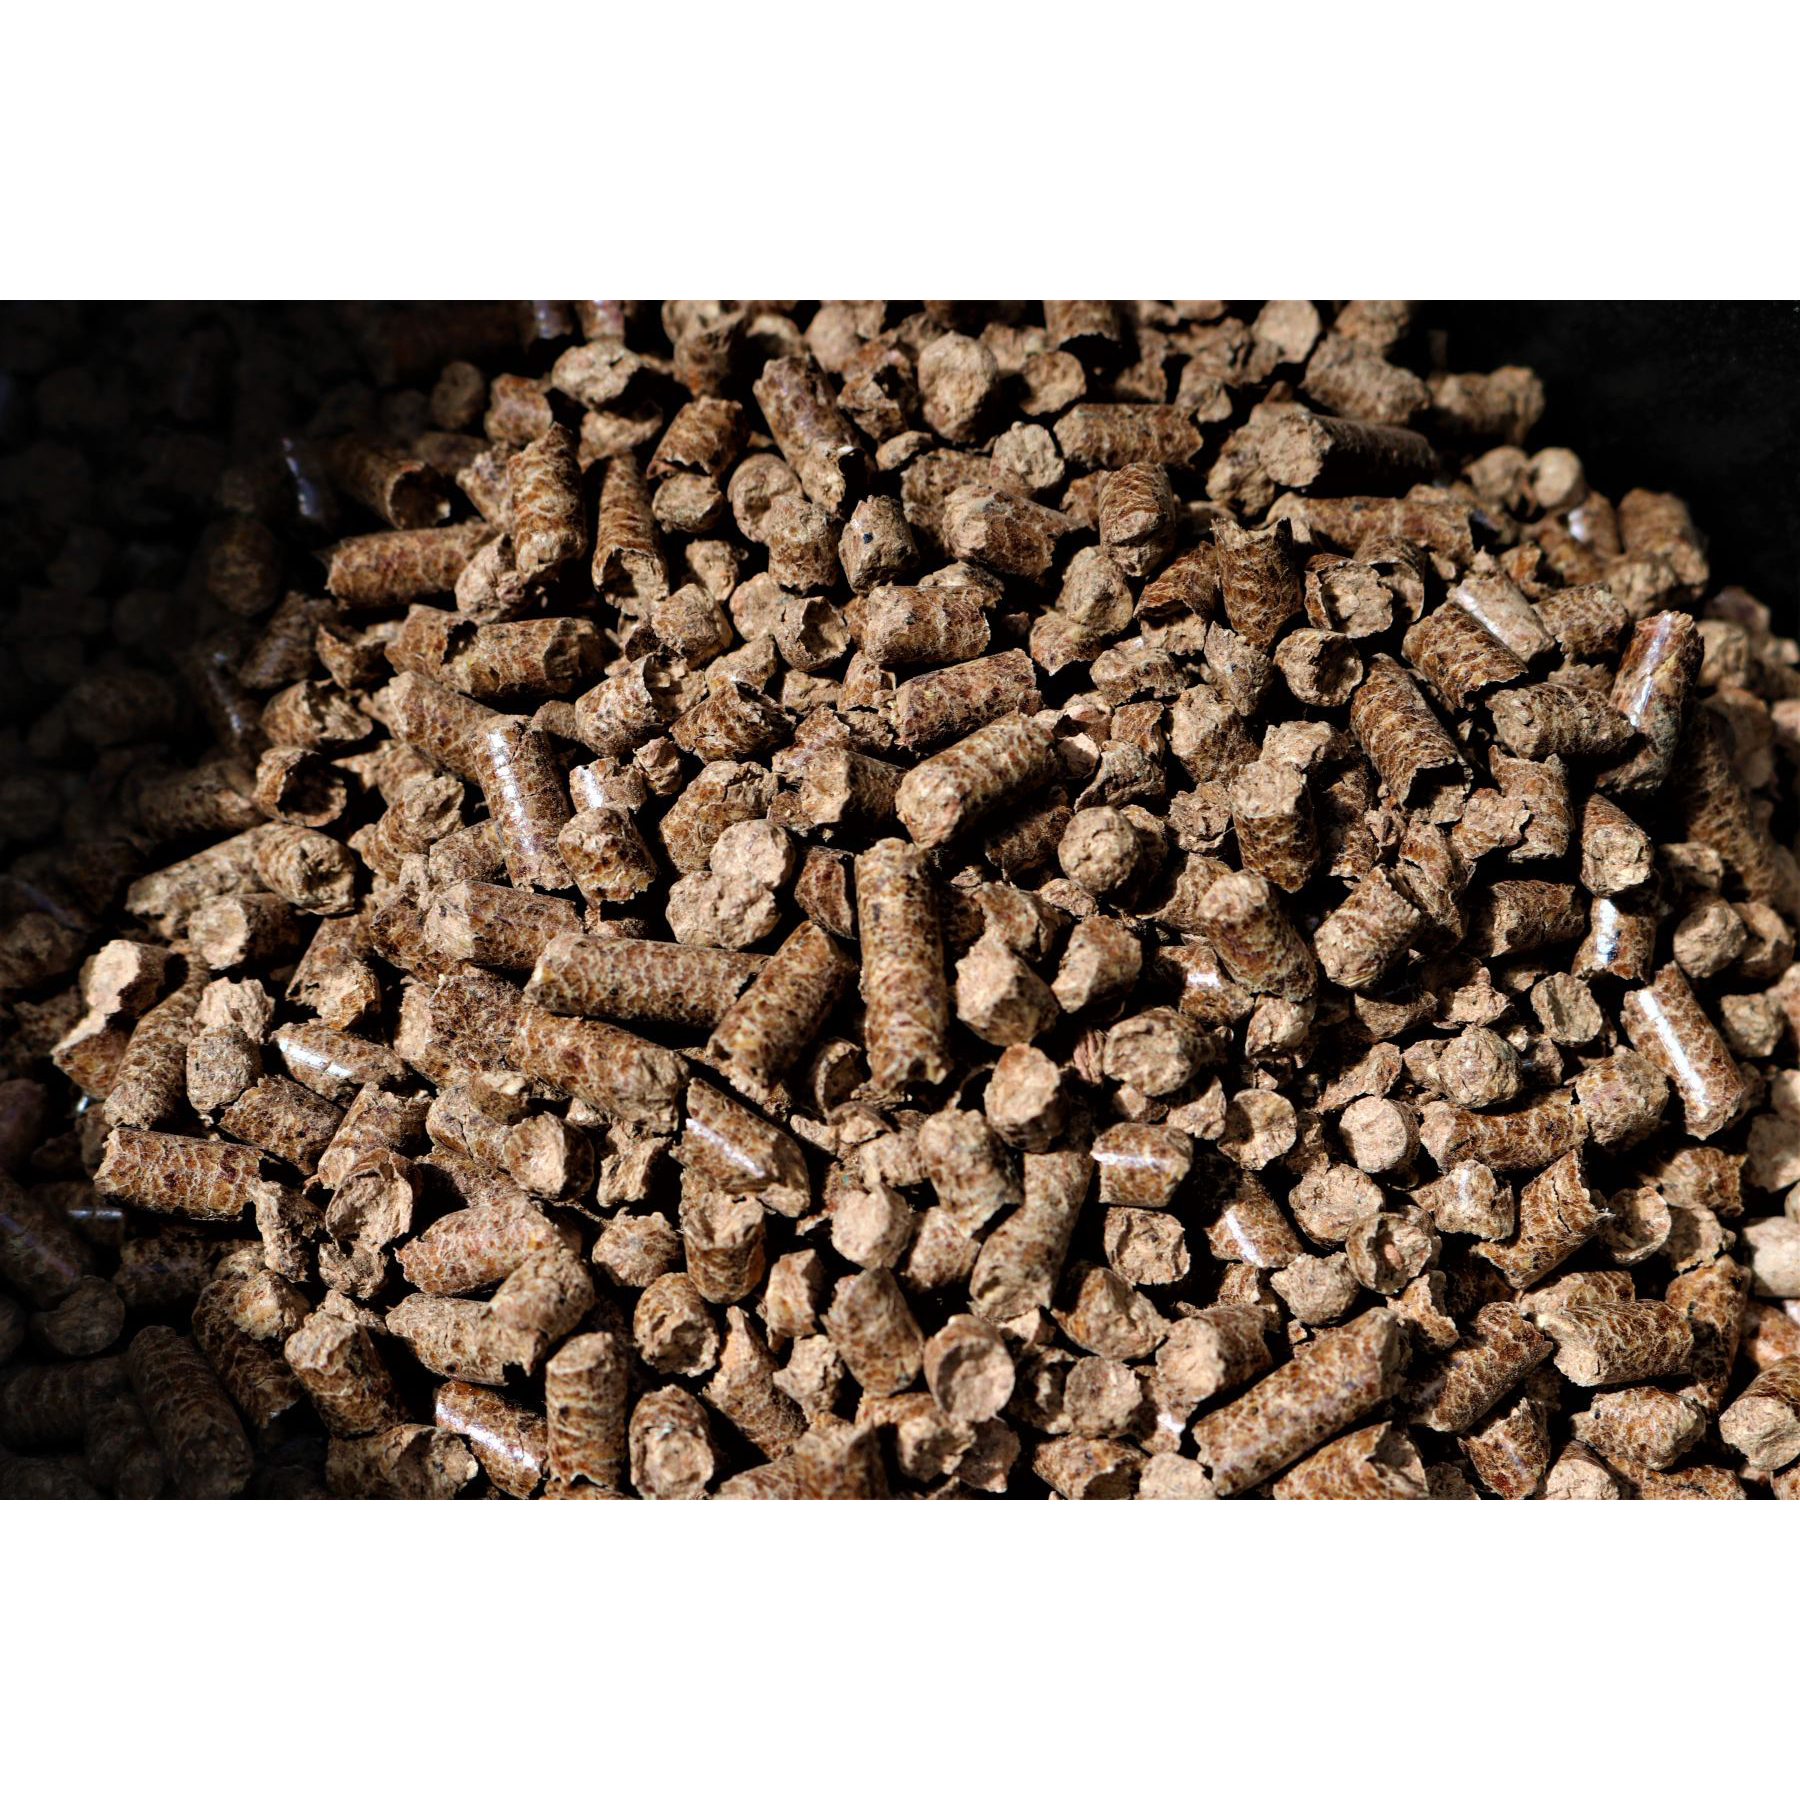 Bear Mountain BBQ 100% Natural Hardwood Maple Flavor Pellets, 20 Pounds - image 5 of 6